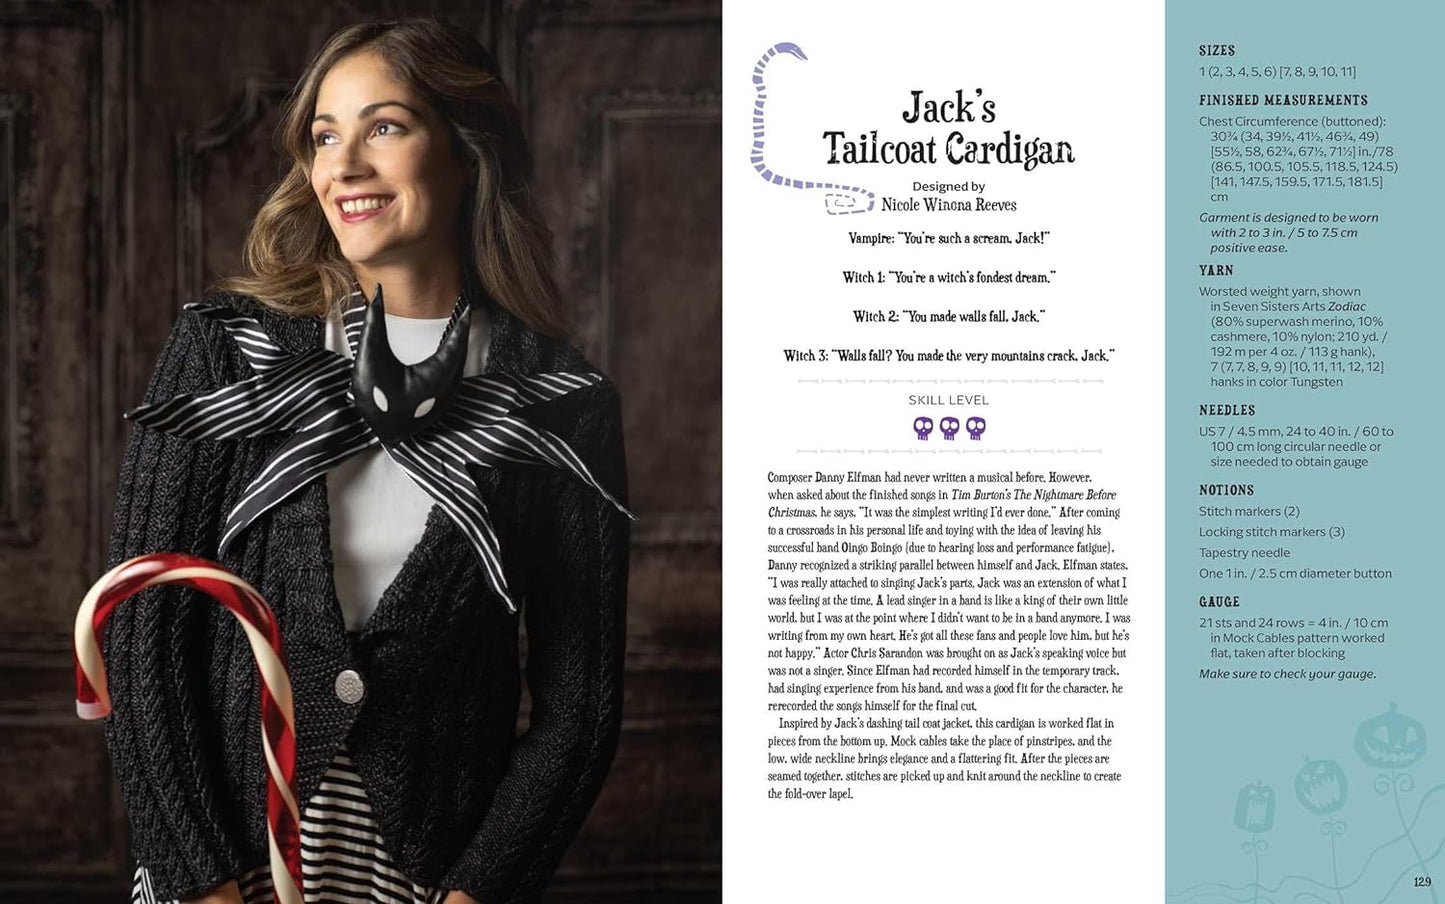 A two-page spread from the book. On the left is a woman dressed in a black cardigan sweater with a black and white mask on the front. On the right are instructions for knitting Jack's Tailcoat Cardigan.